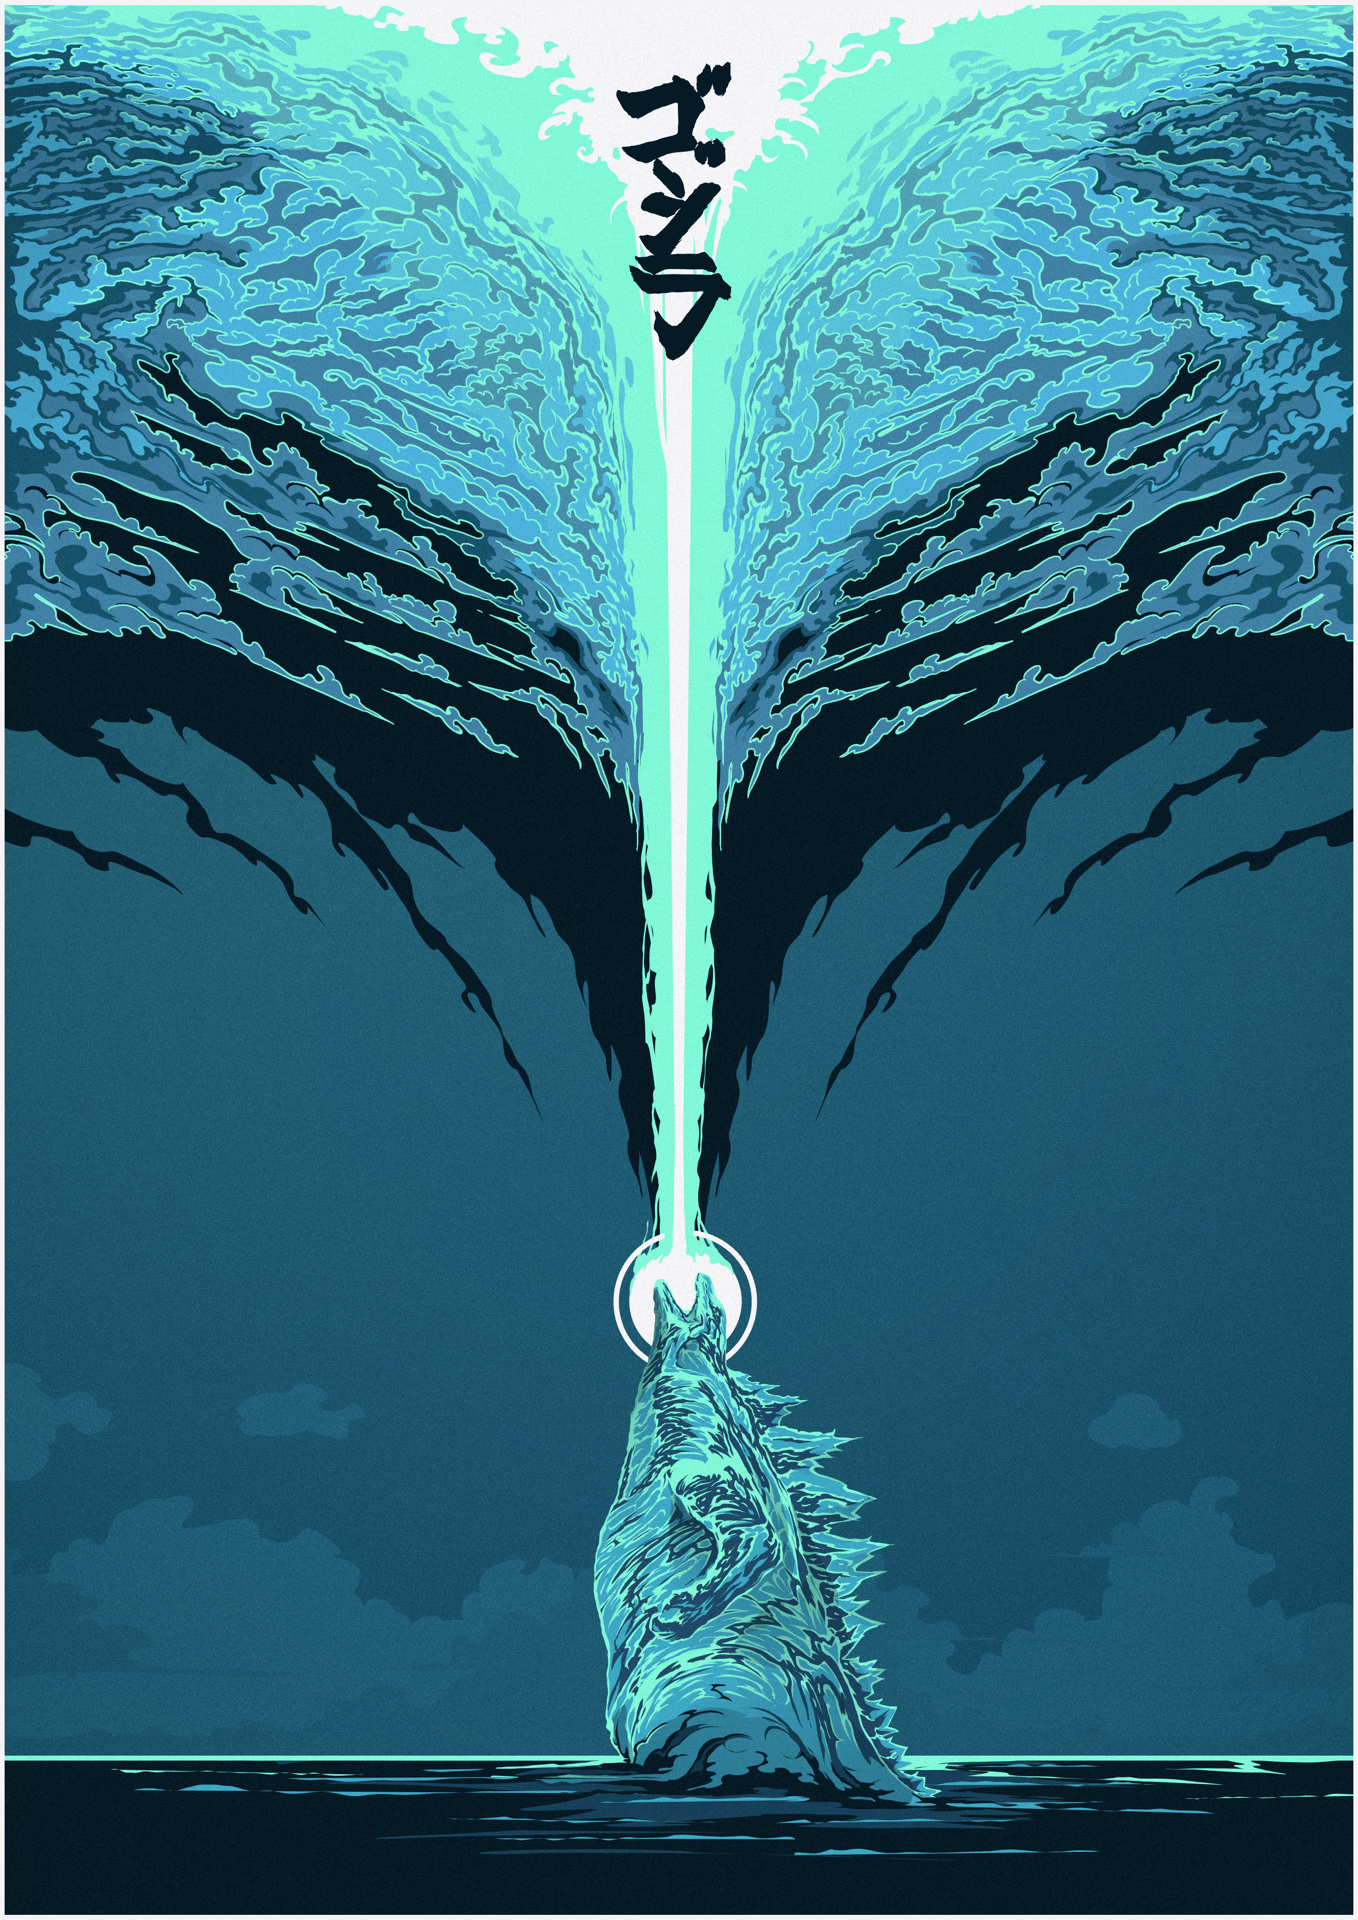 Godzilla: King of the Monsters (2019) [1358 x 1920]s life